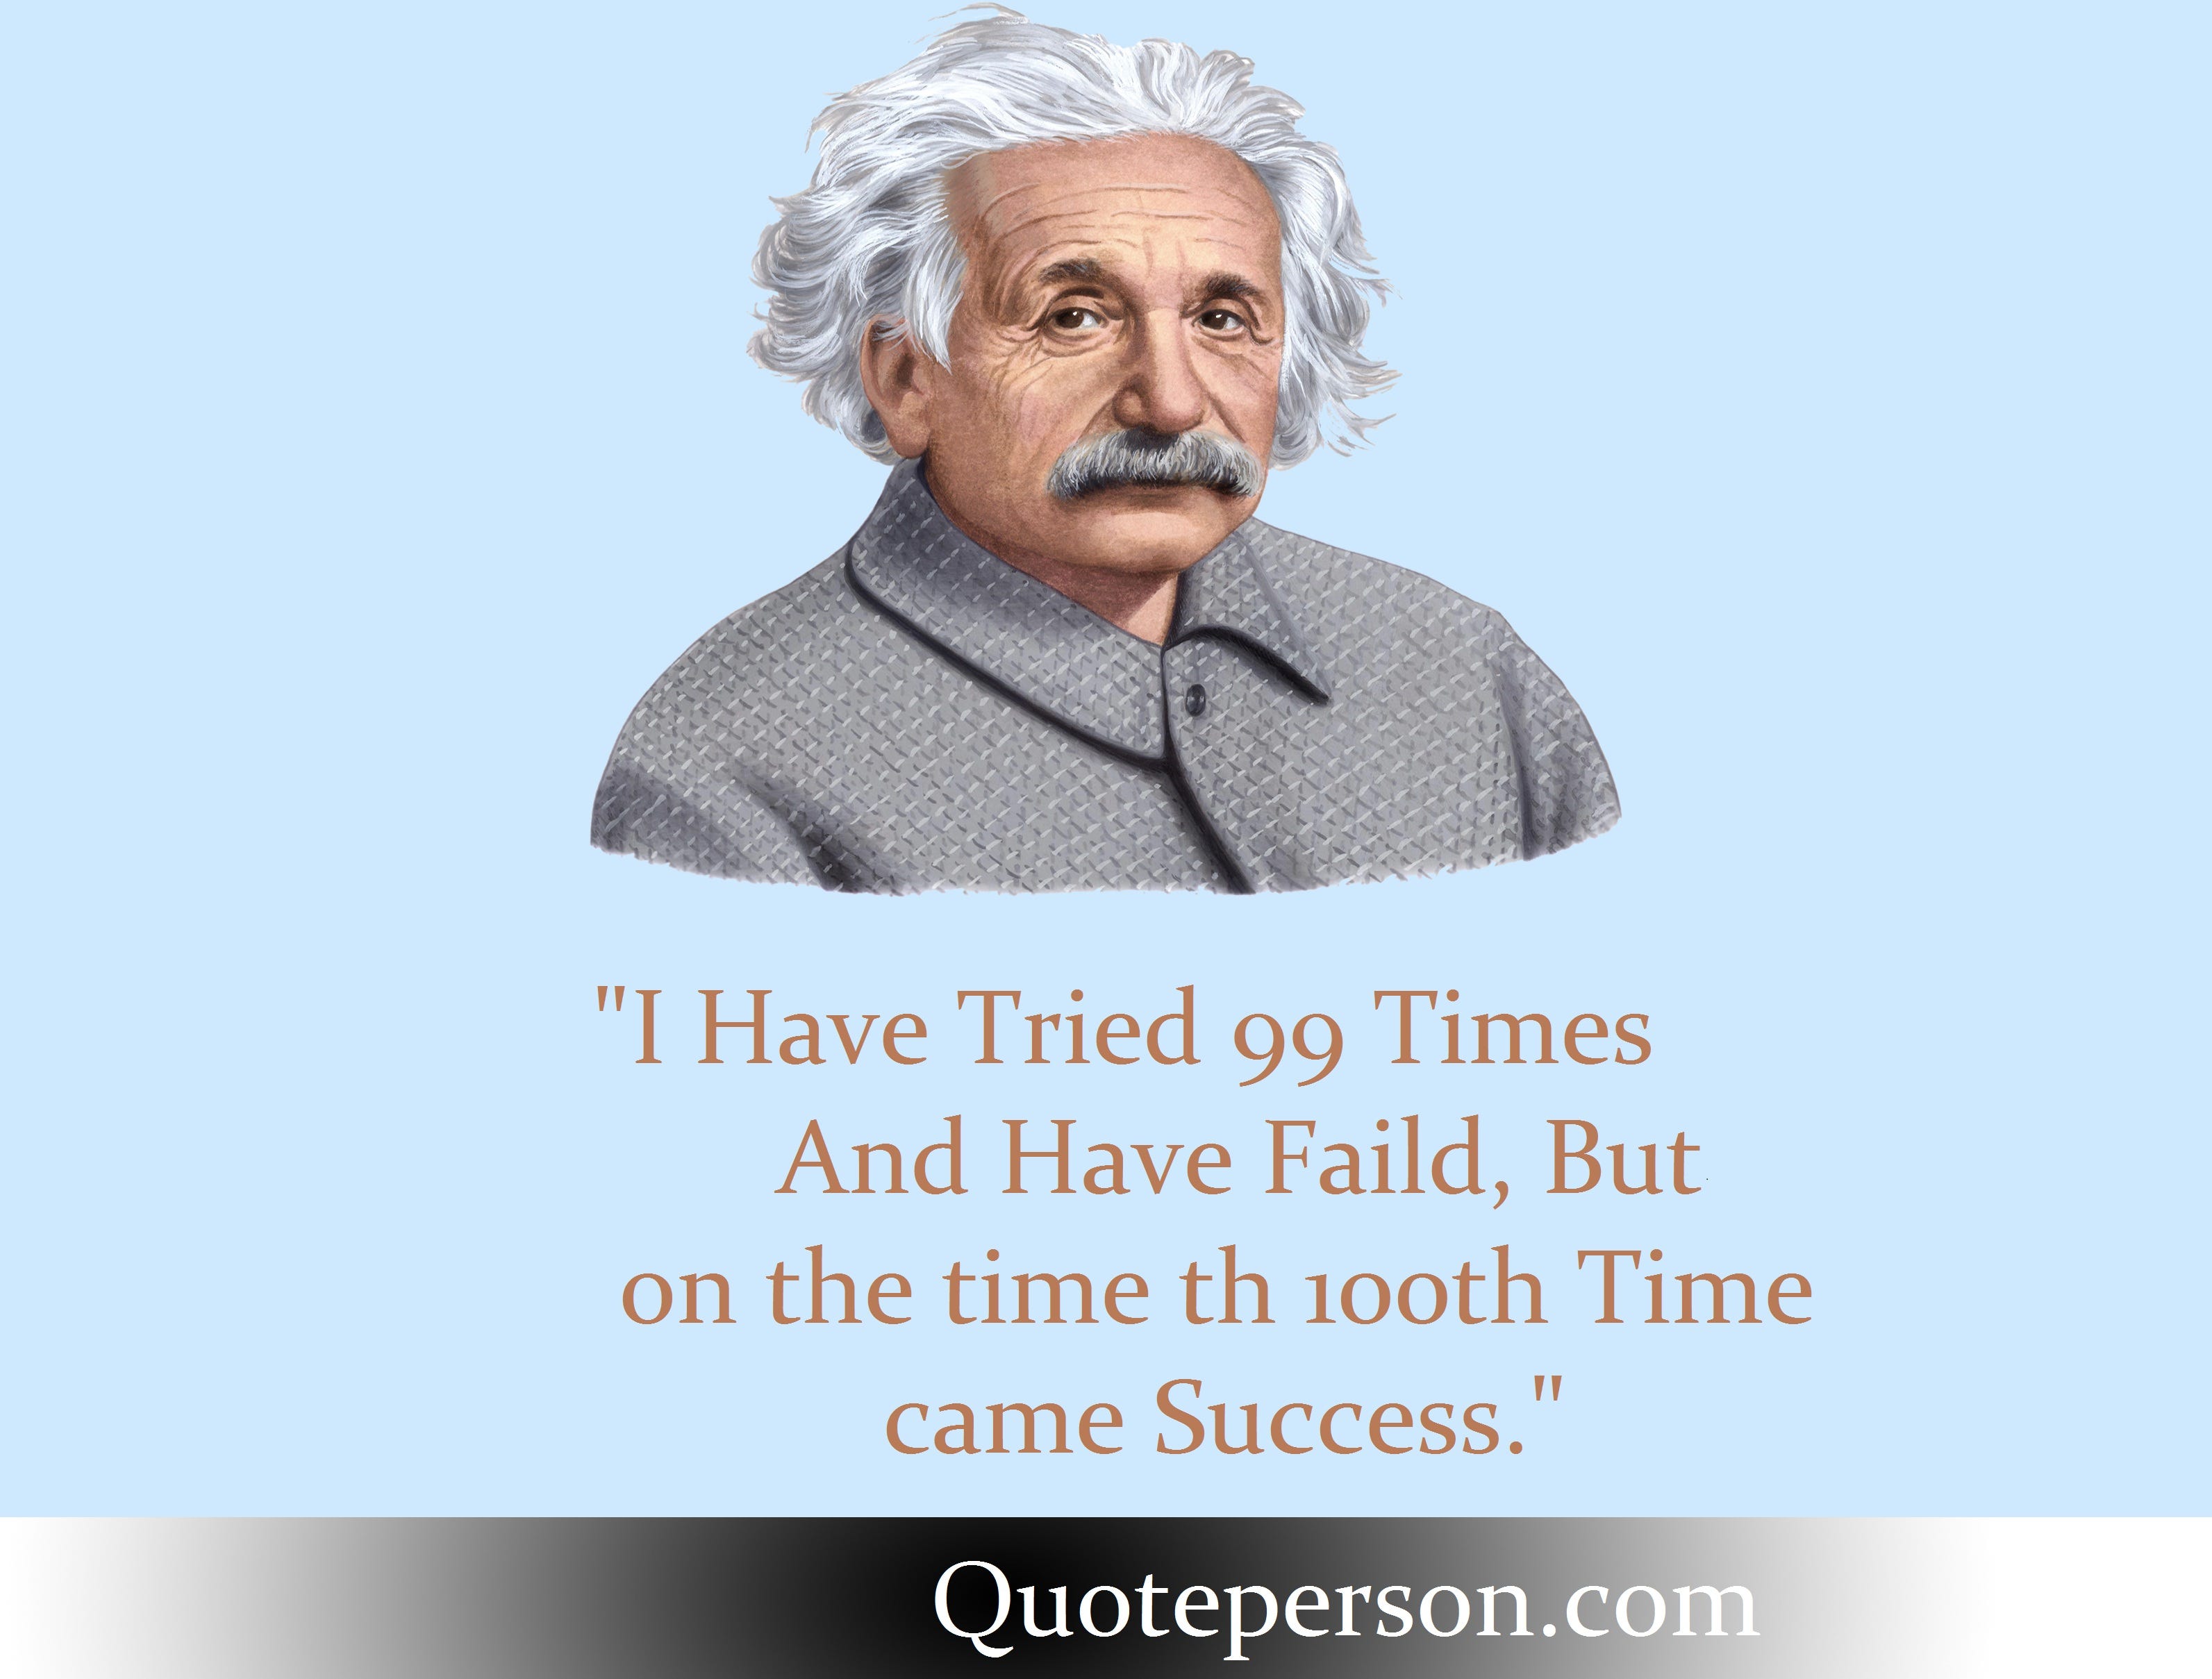 Best Quote Of The Day Quoteperson Share A Collection Of By Quoteperson Medium